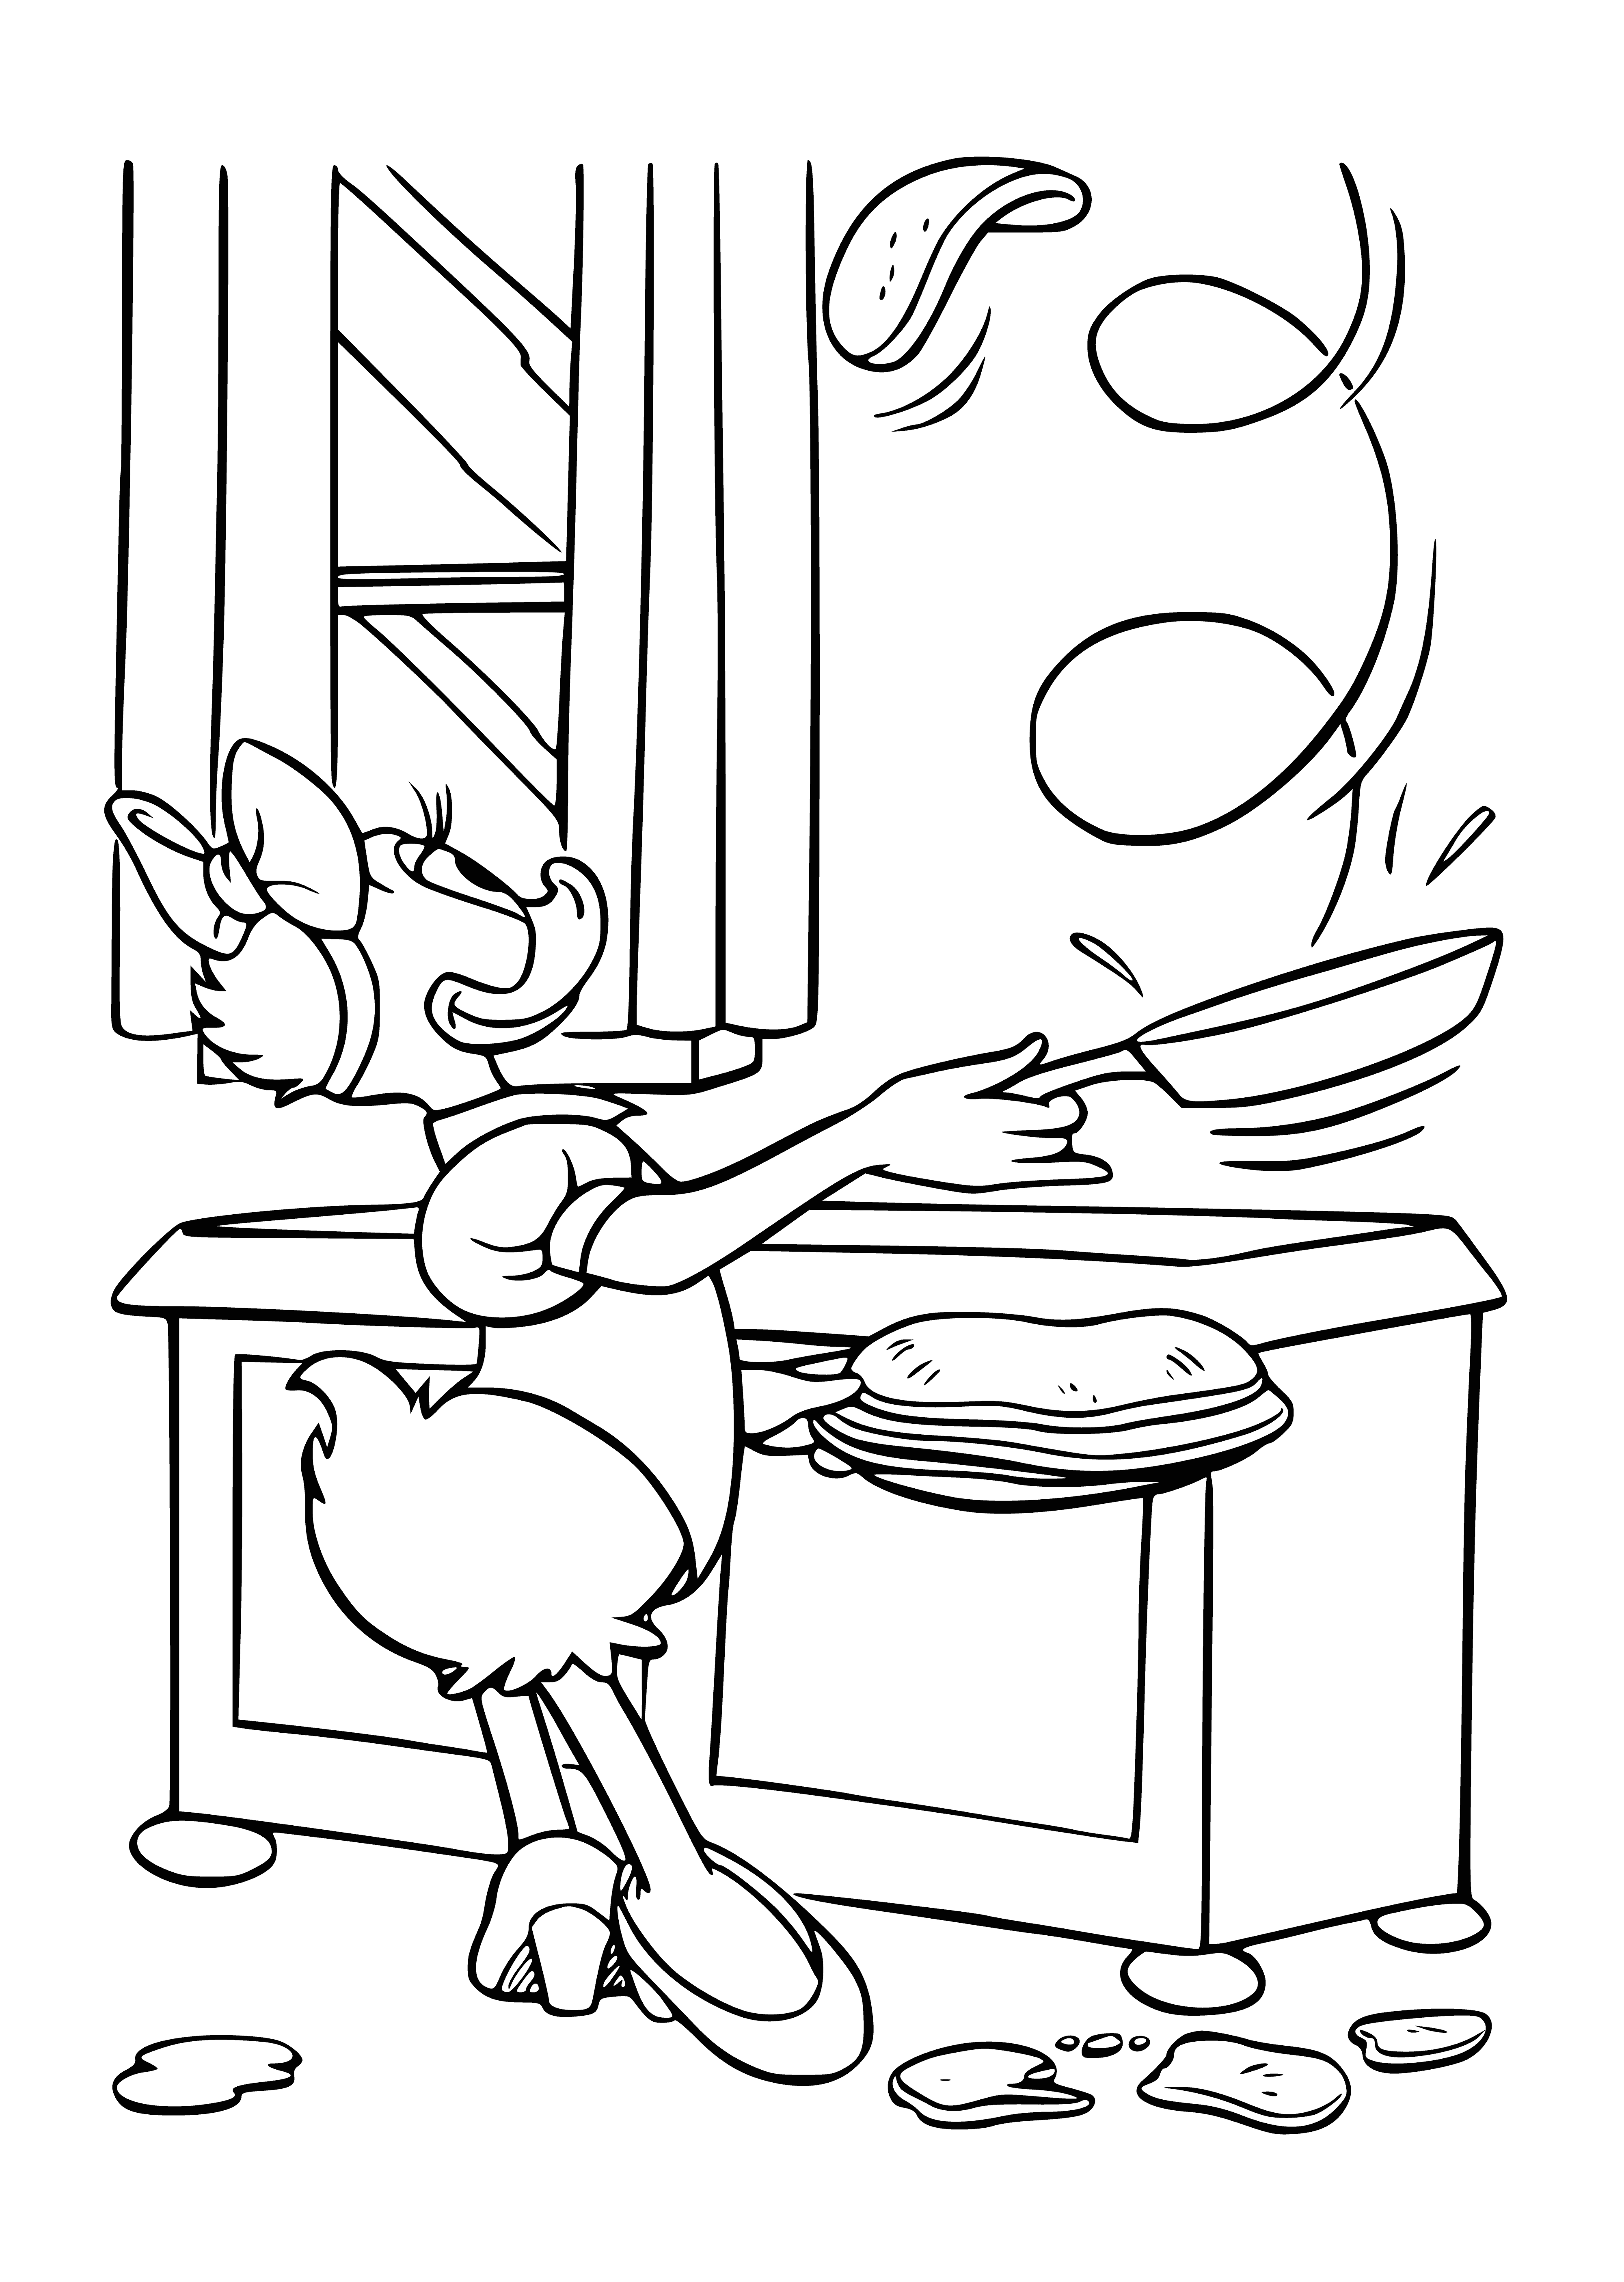 coloring page: Friends Mickey, Donald, & Goofy cooking pancakes & eating them. Mickey's ready to eat! #Disney